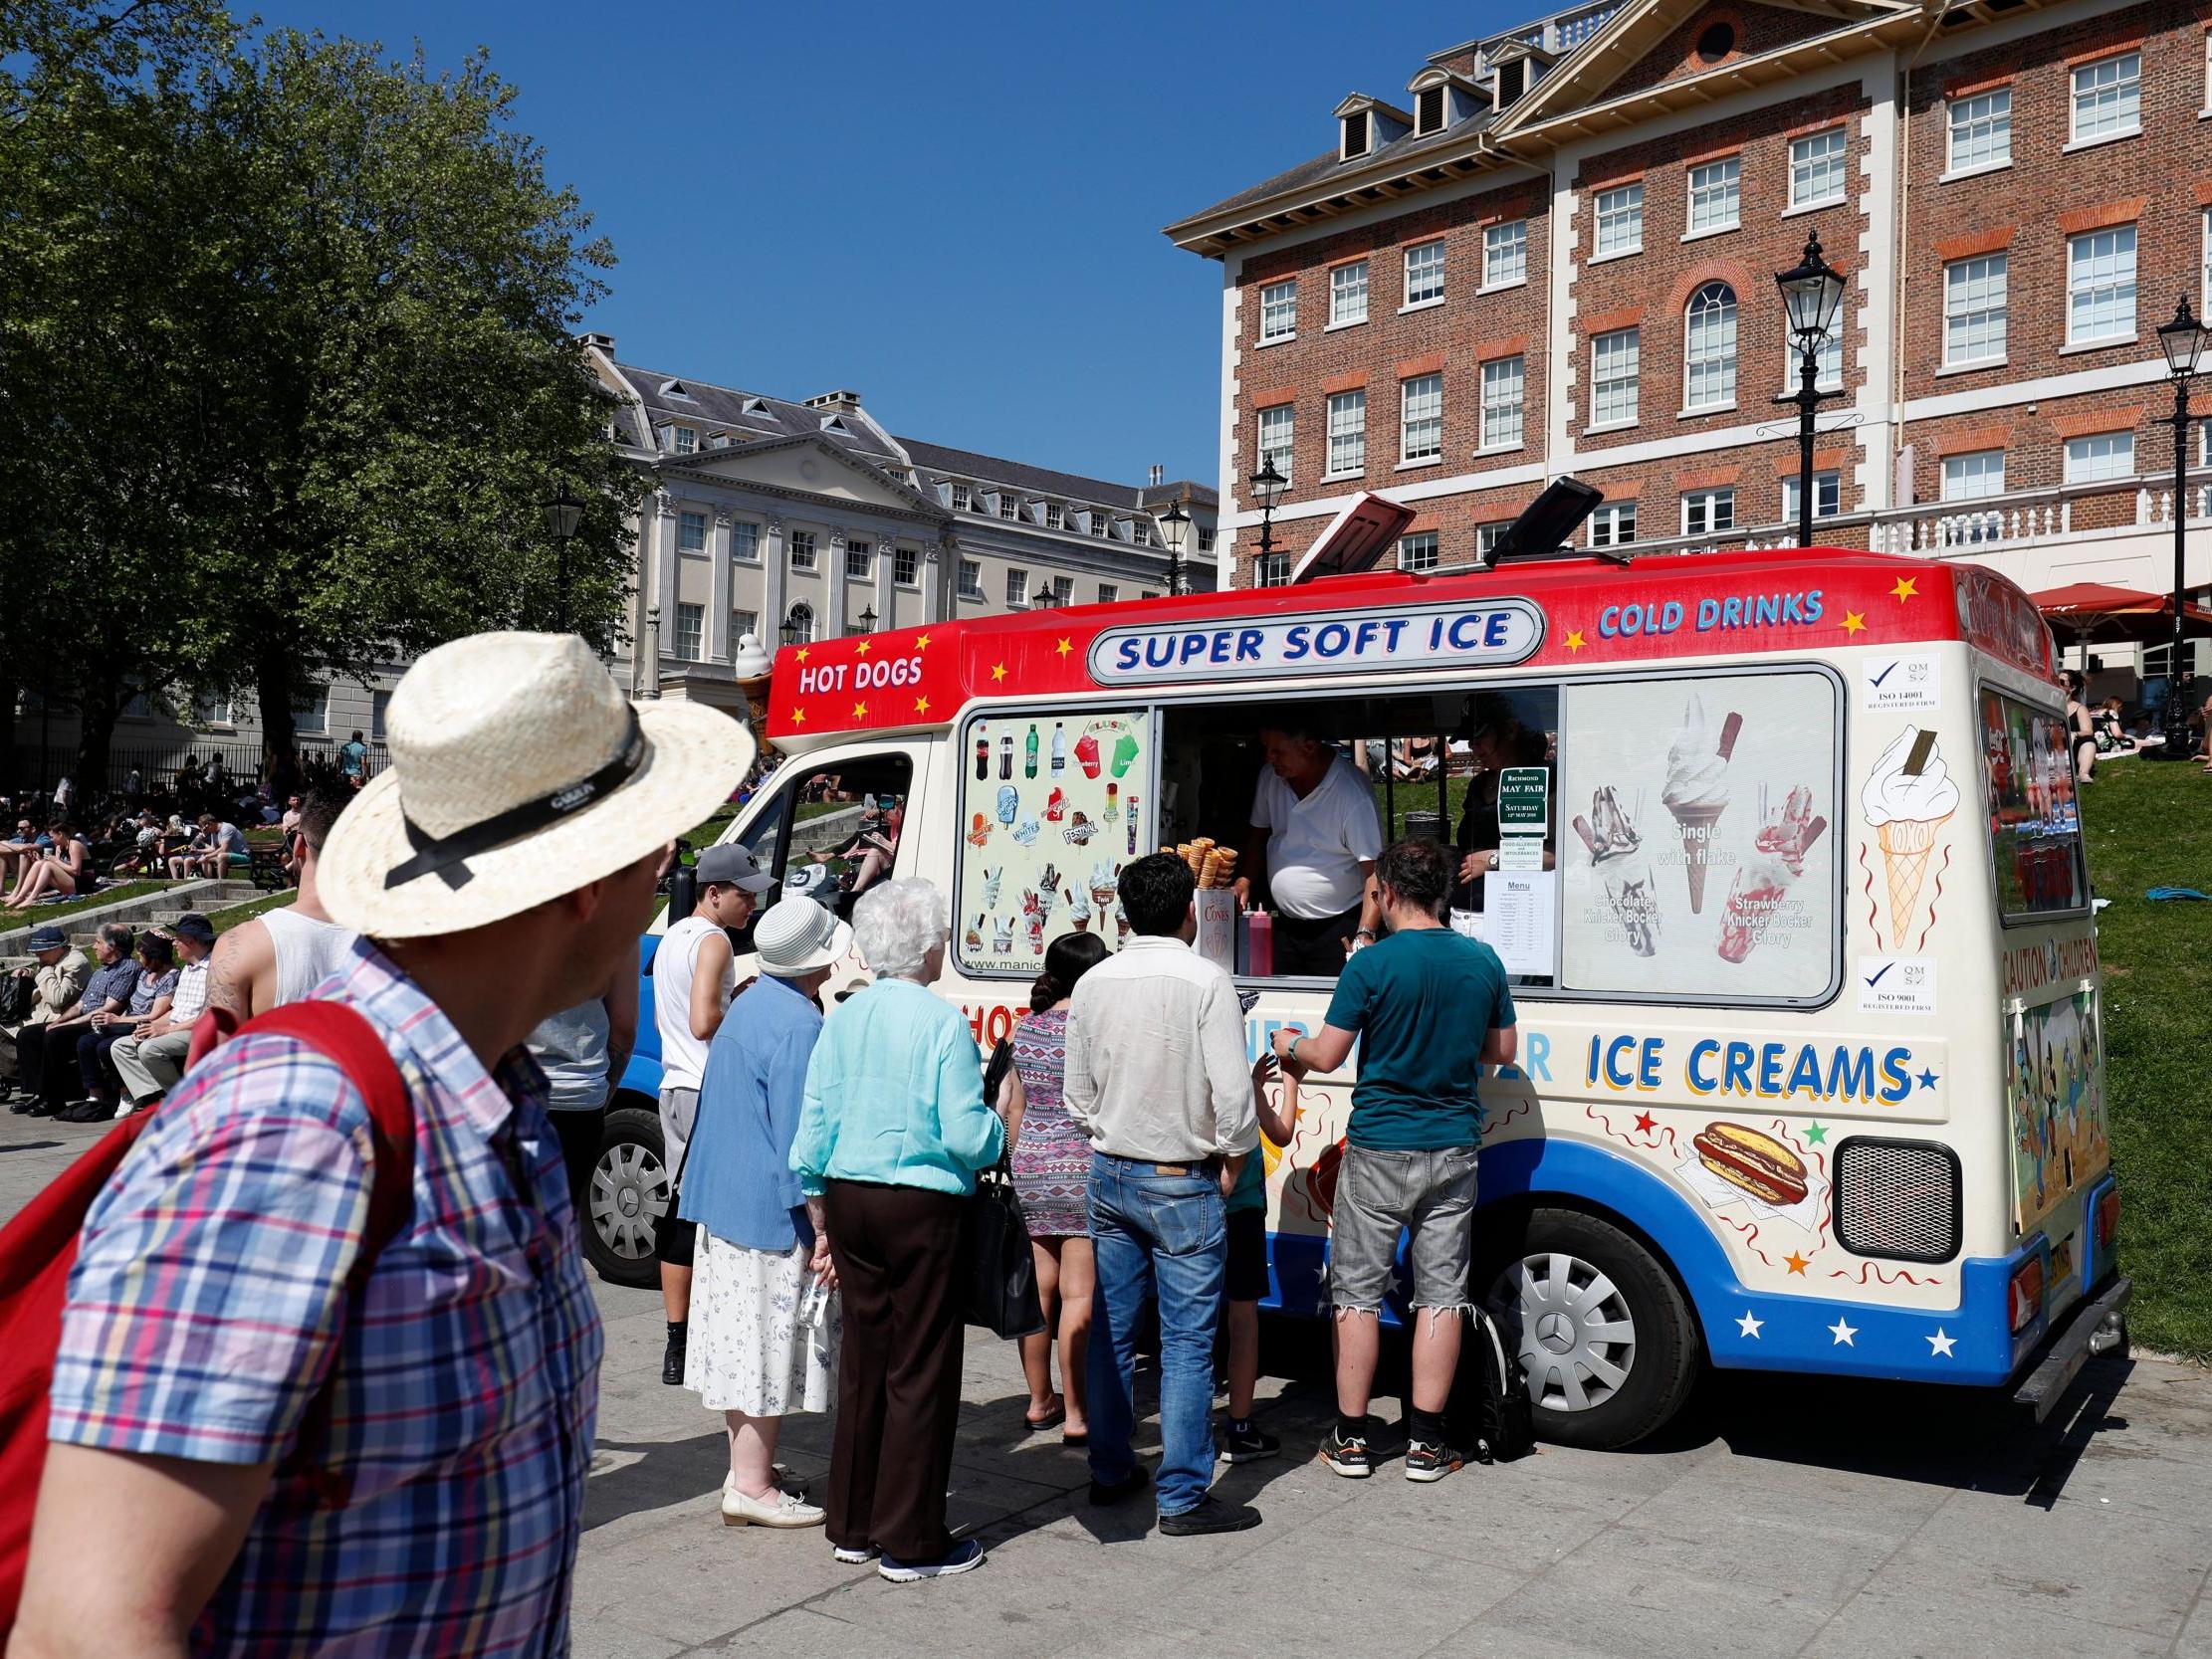 People queue at an ice cream van as they soak up the sun in Richmond, south west London